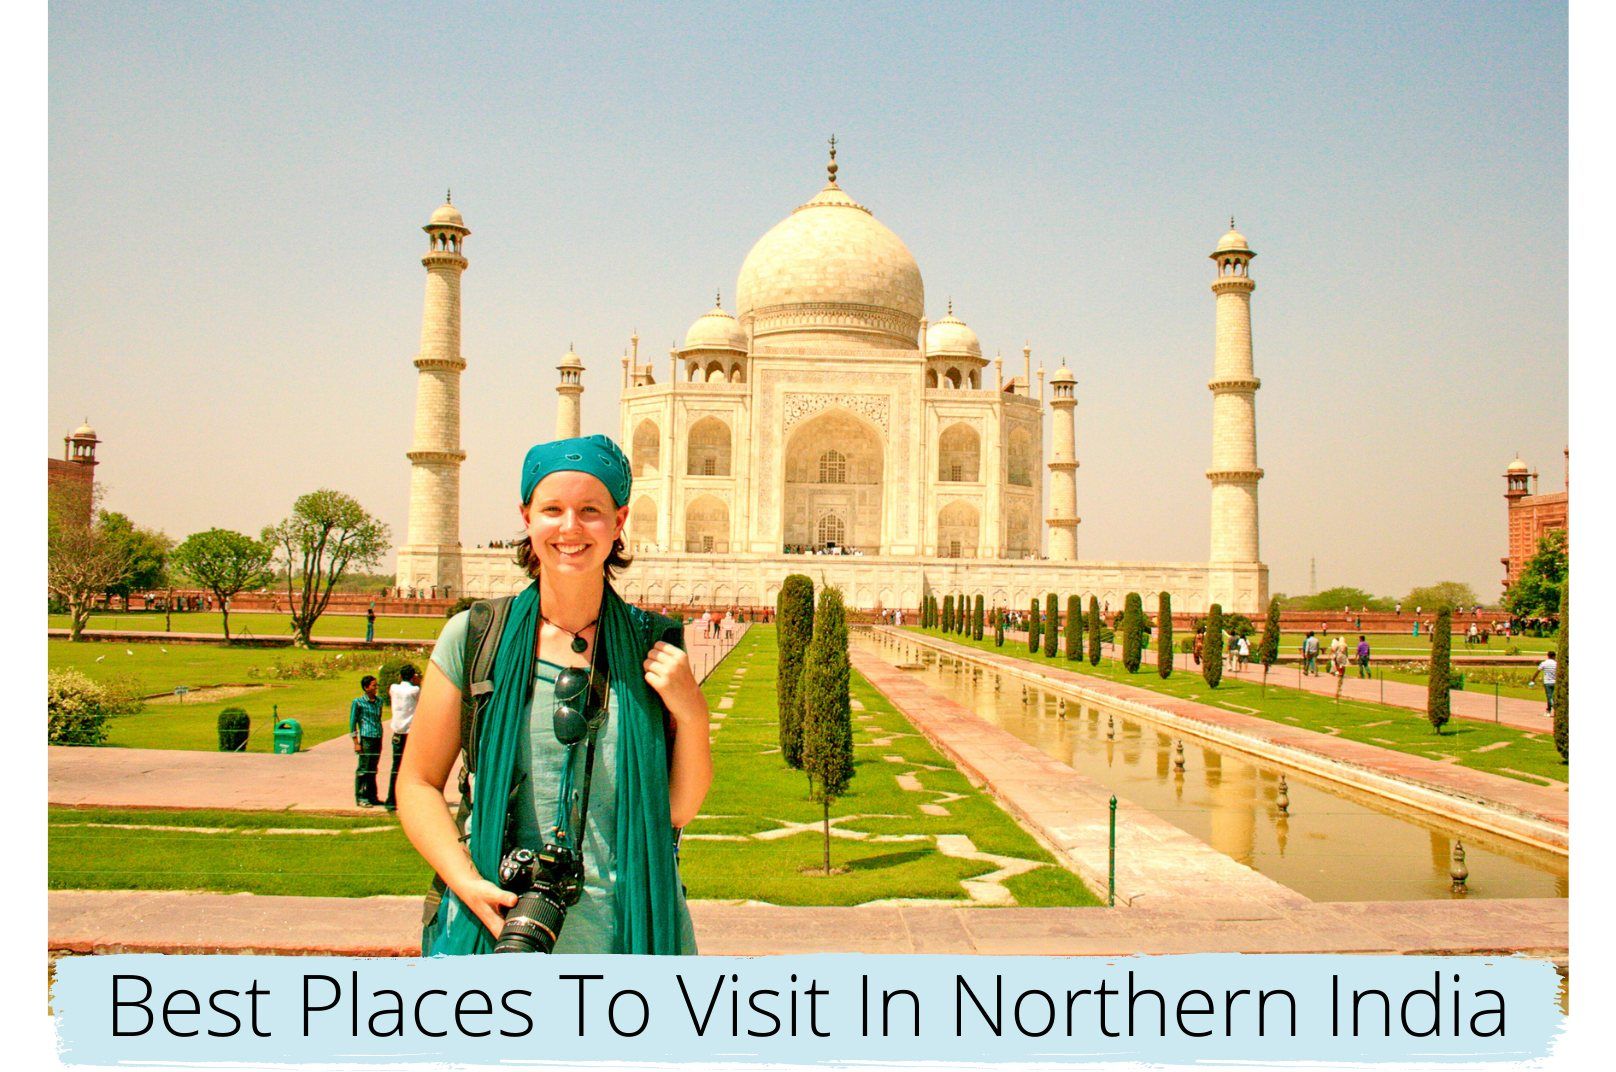 Plan the ultimate India trip